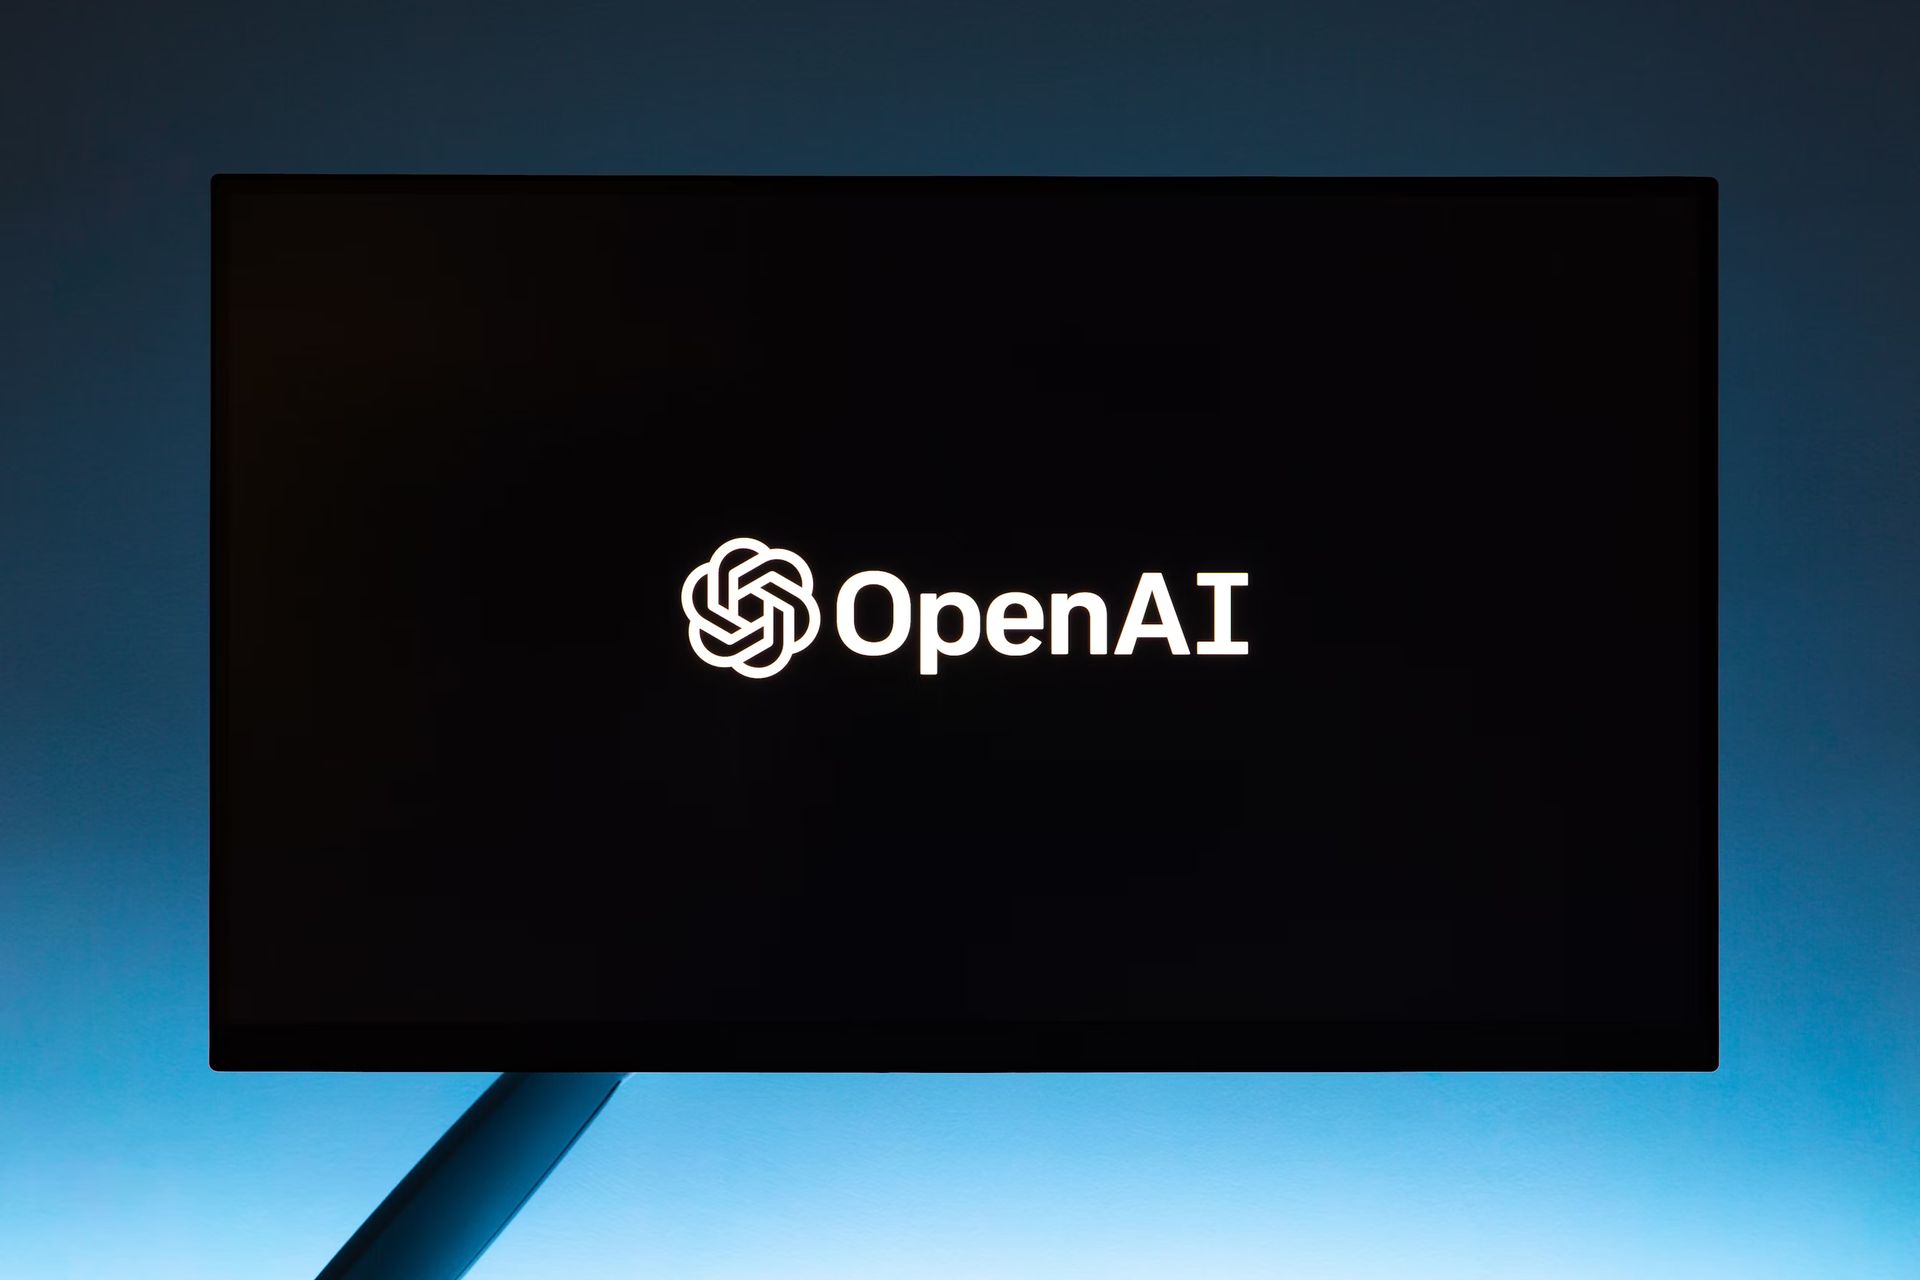 OpenAI doesn’t want people to use DALL-E for deepfakes